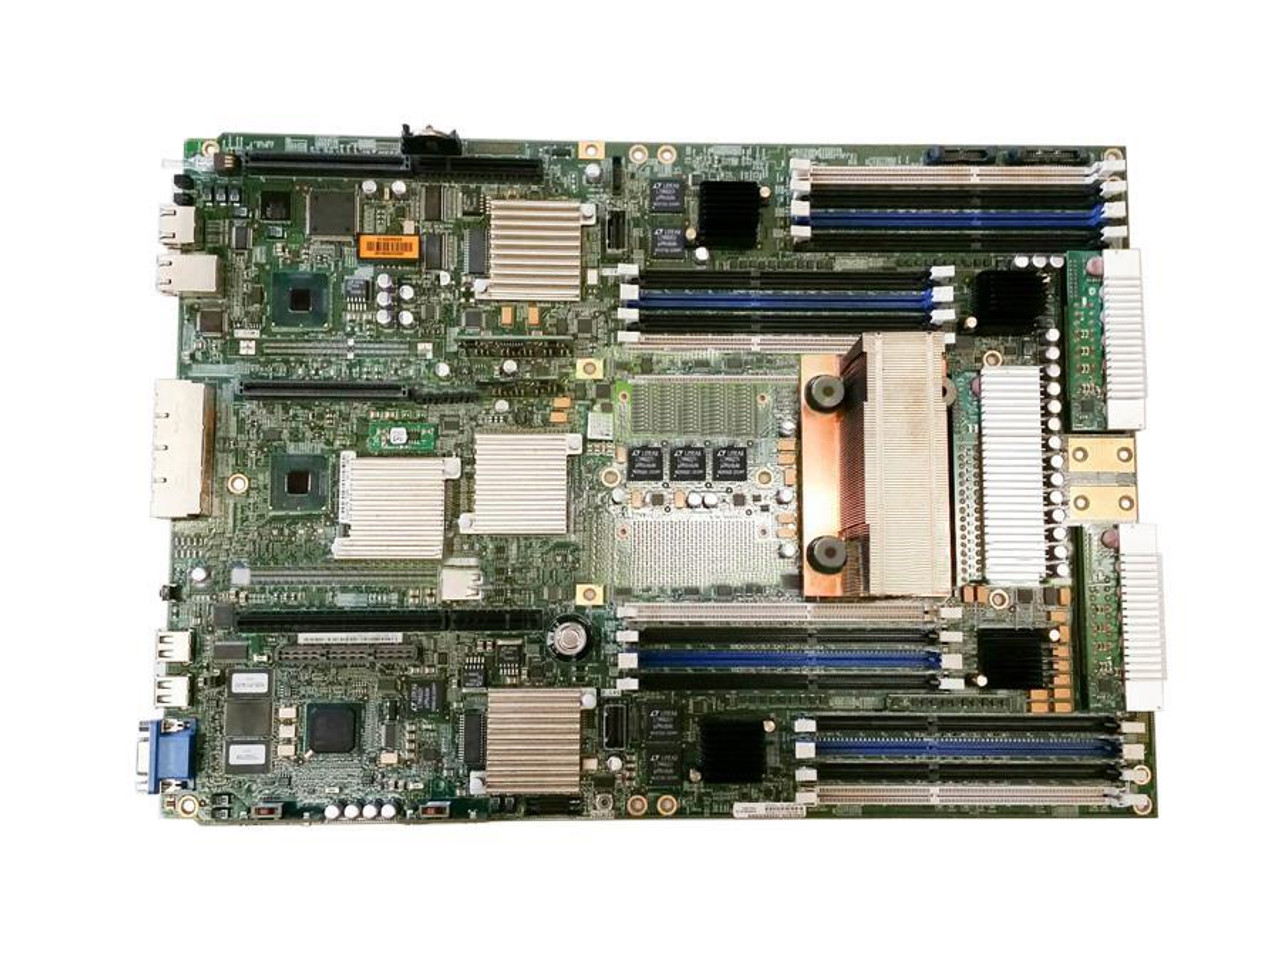 7042220 Sun System Board (Motherboard) for Netra Sparc T4-1 (Refurbished)